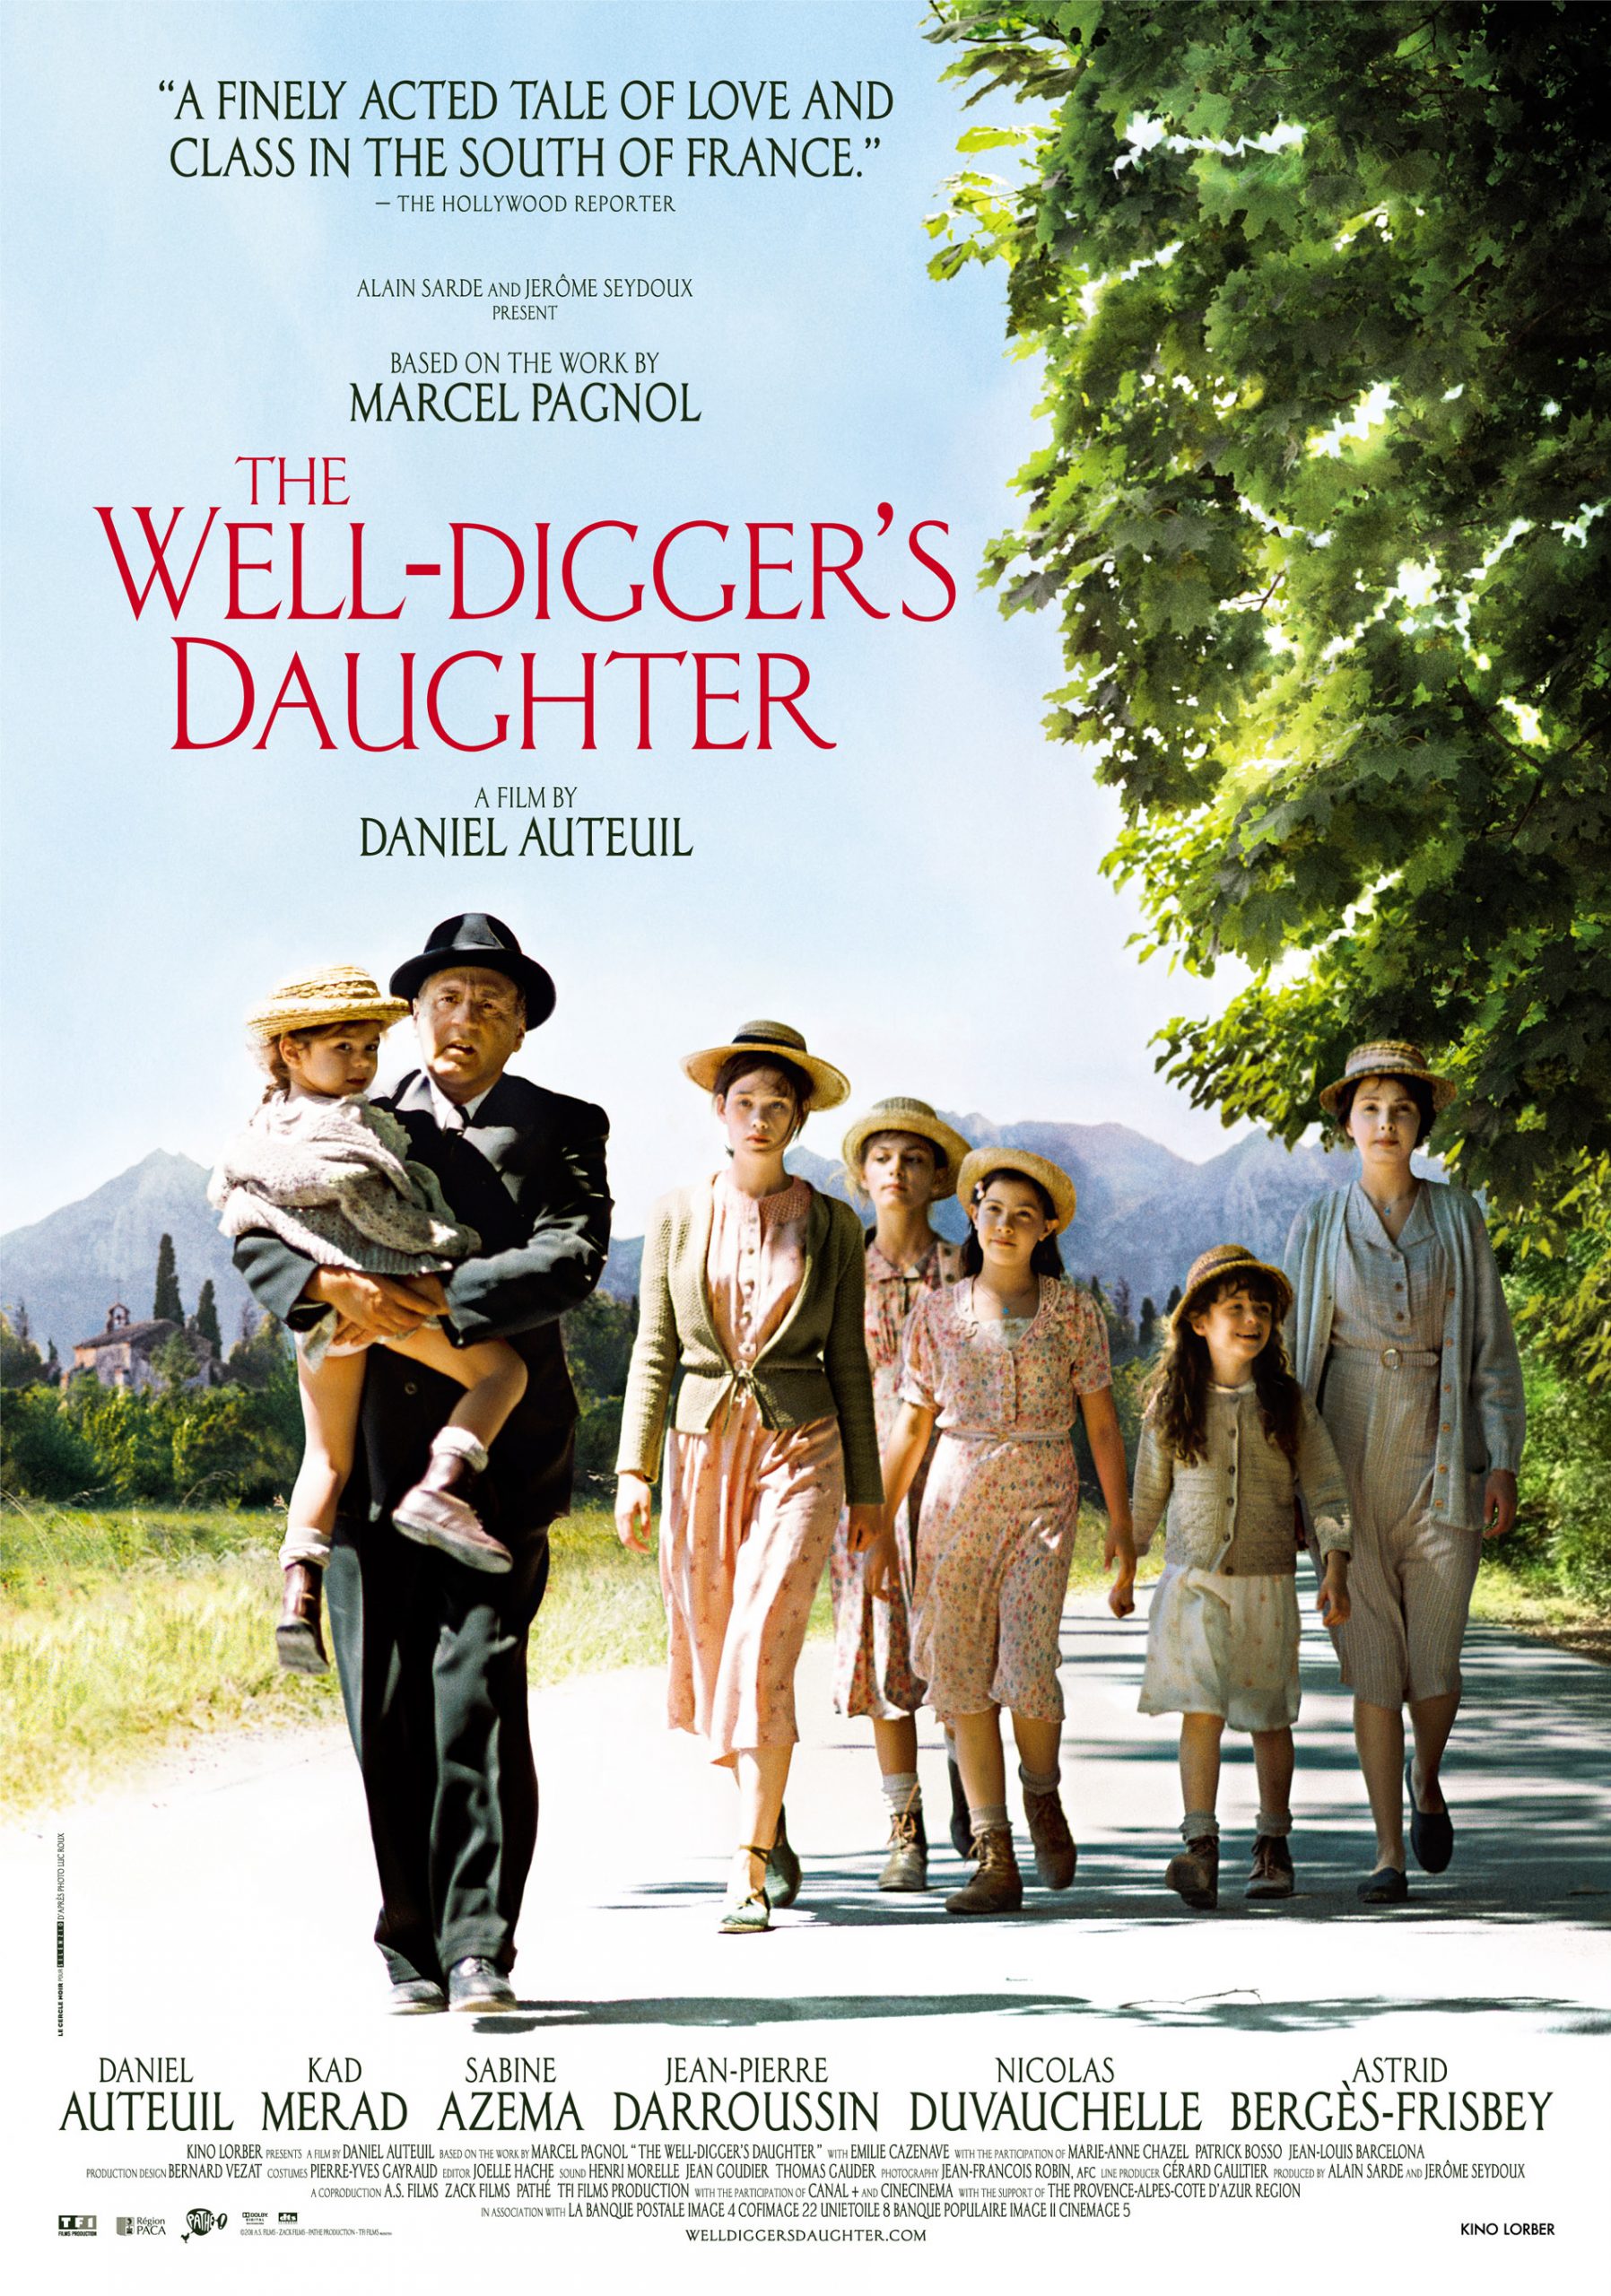 THE WELL-DIGGER’S DAUGHTER